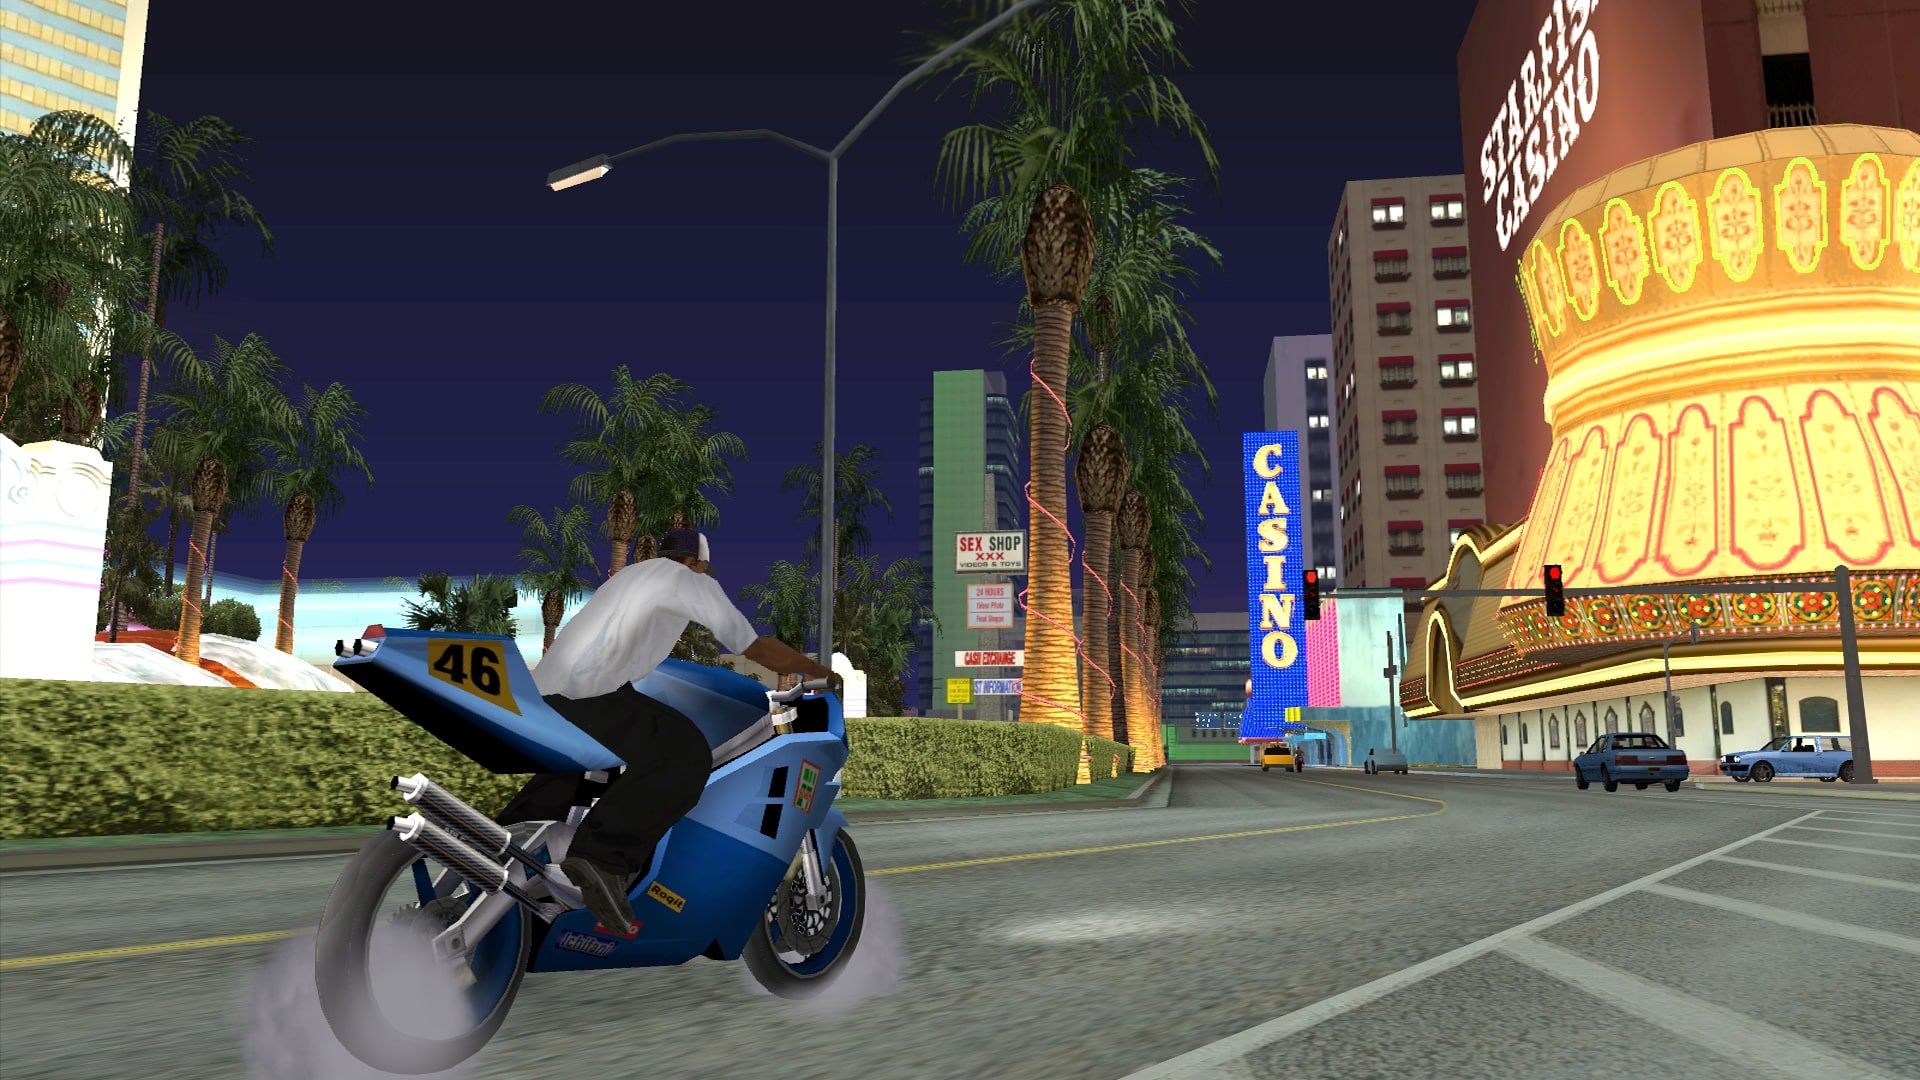 (Las Venturas played a central role in the story of San Andreas, but in GTA 5 the Rockstars version of the real Las Vegas cannot be found).